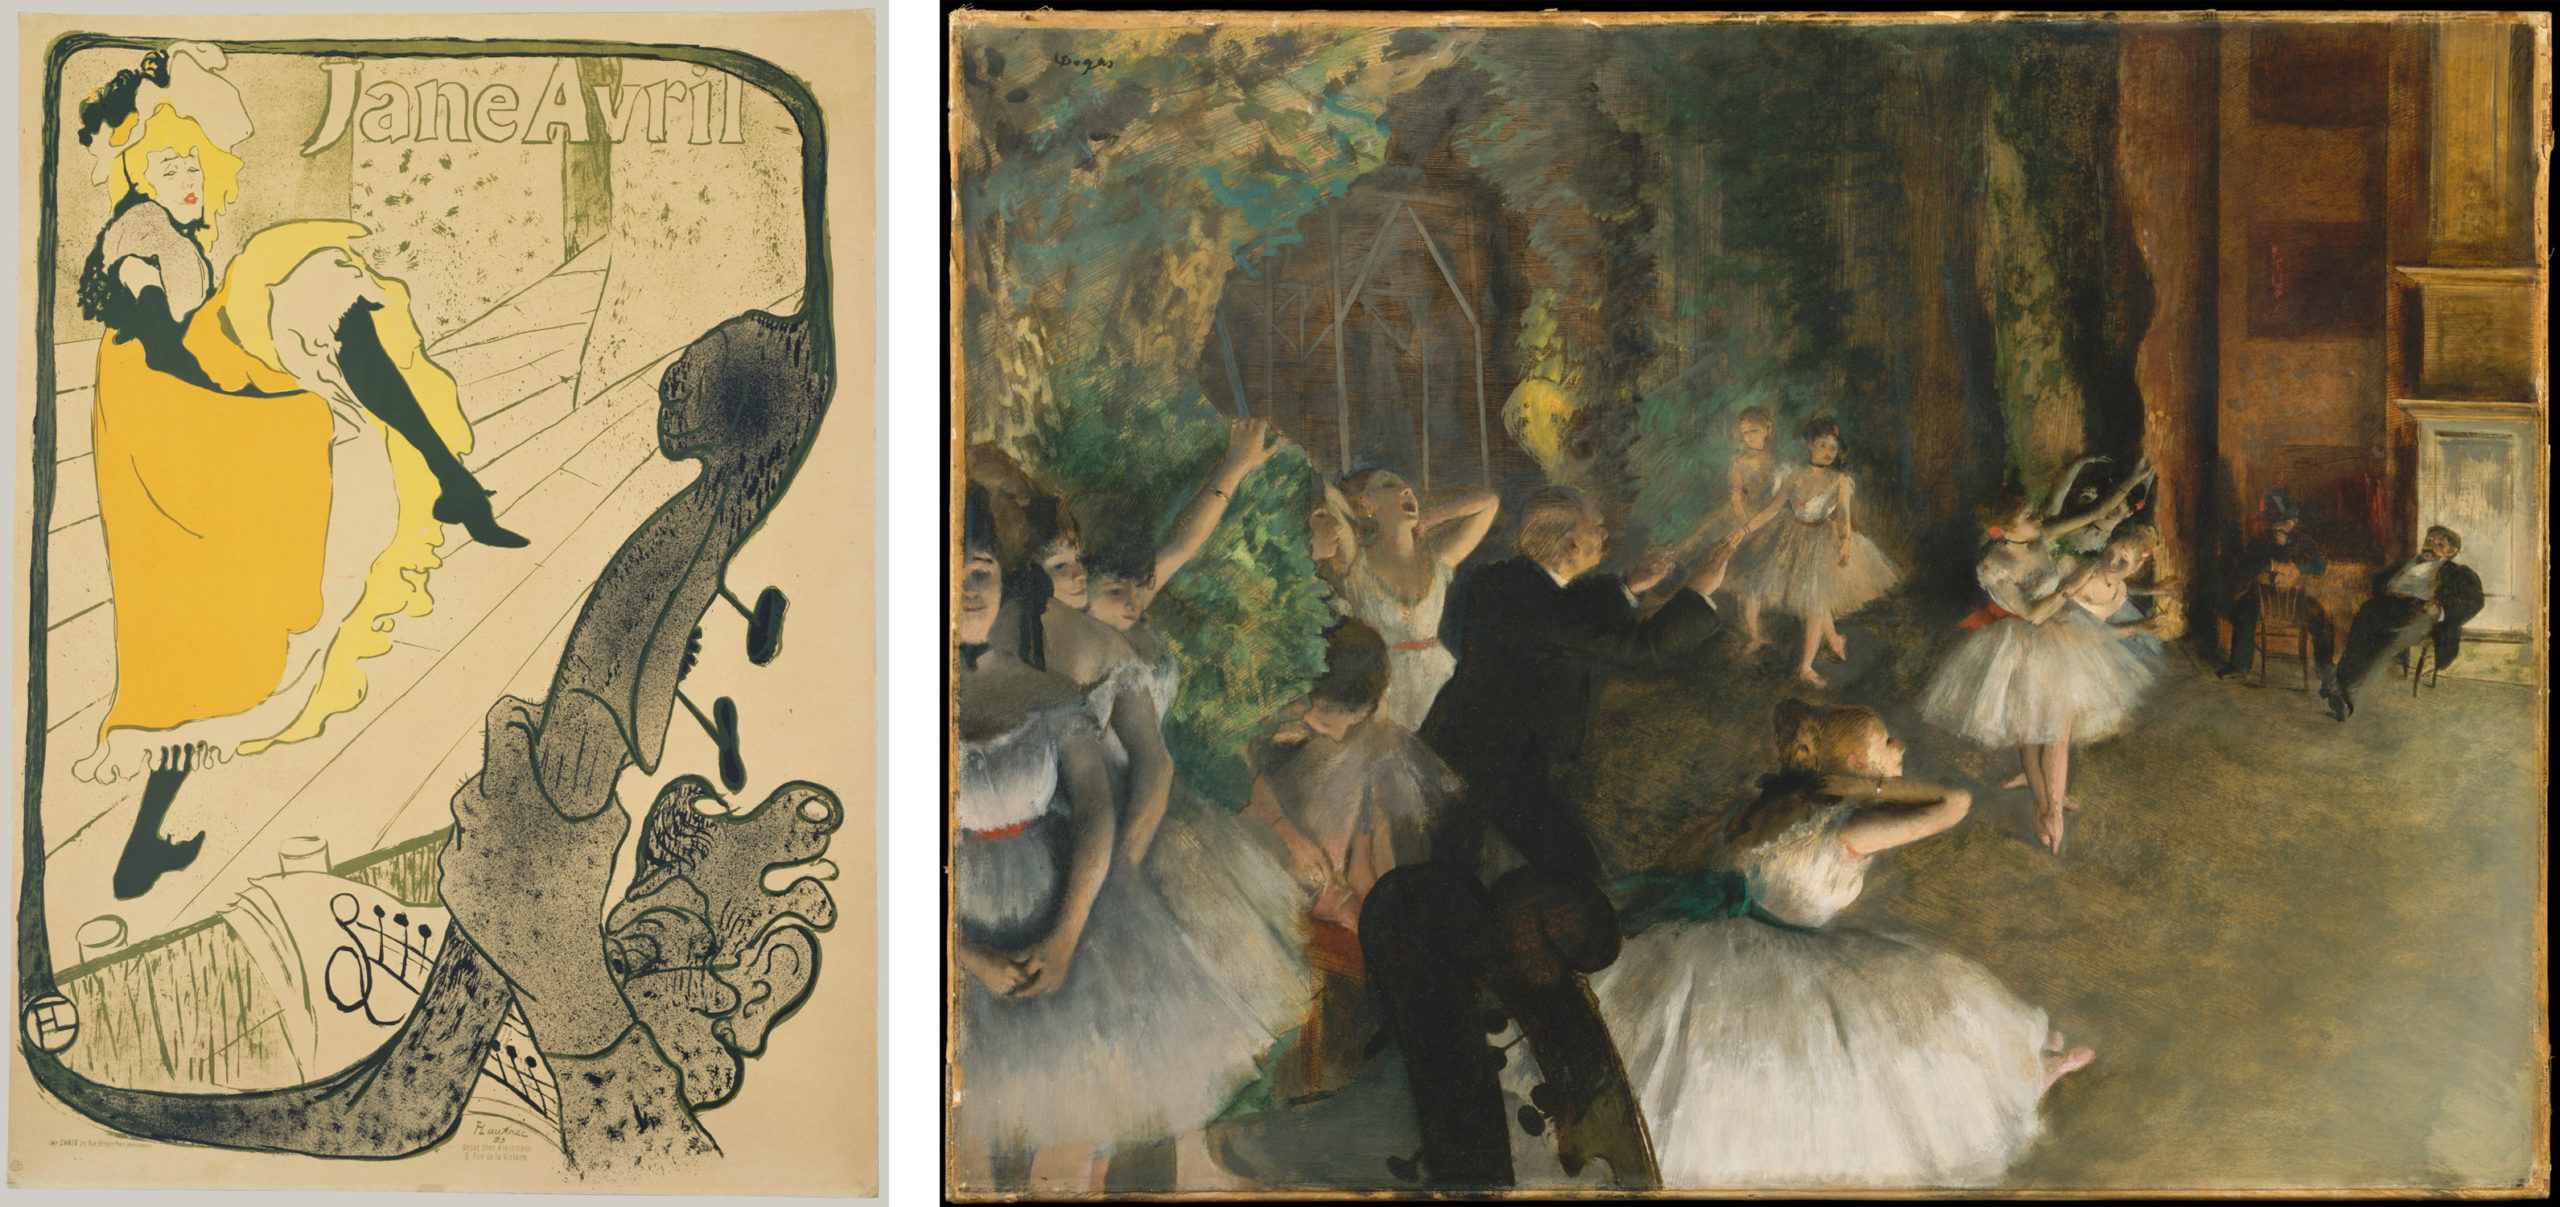 Left: Henri de Toulouse-Lautrec, Jane Avril, lithograph on paper, 50 13/16 x 36 13/16 inches (The Metropolitan Museum of Art); Right: Edgar Degas, The Rehearsal of the Ballet Onstage, c. 1874, oil on paper, 21 3/8 x 28 3/4” (The Metropolitan Museum of Art)